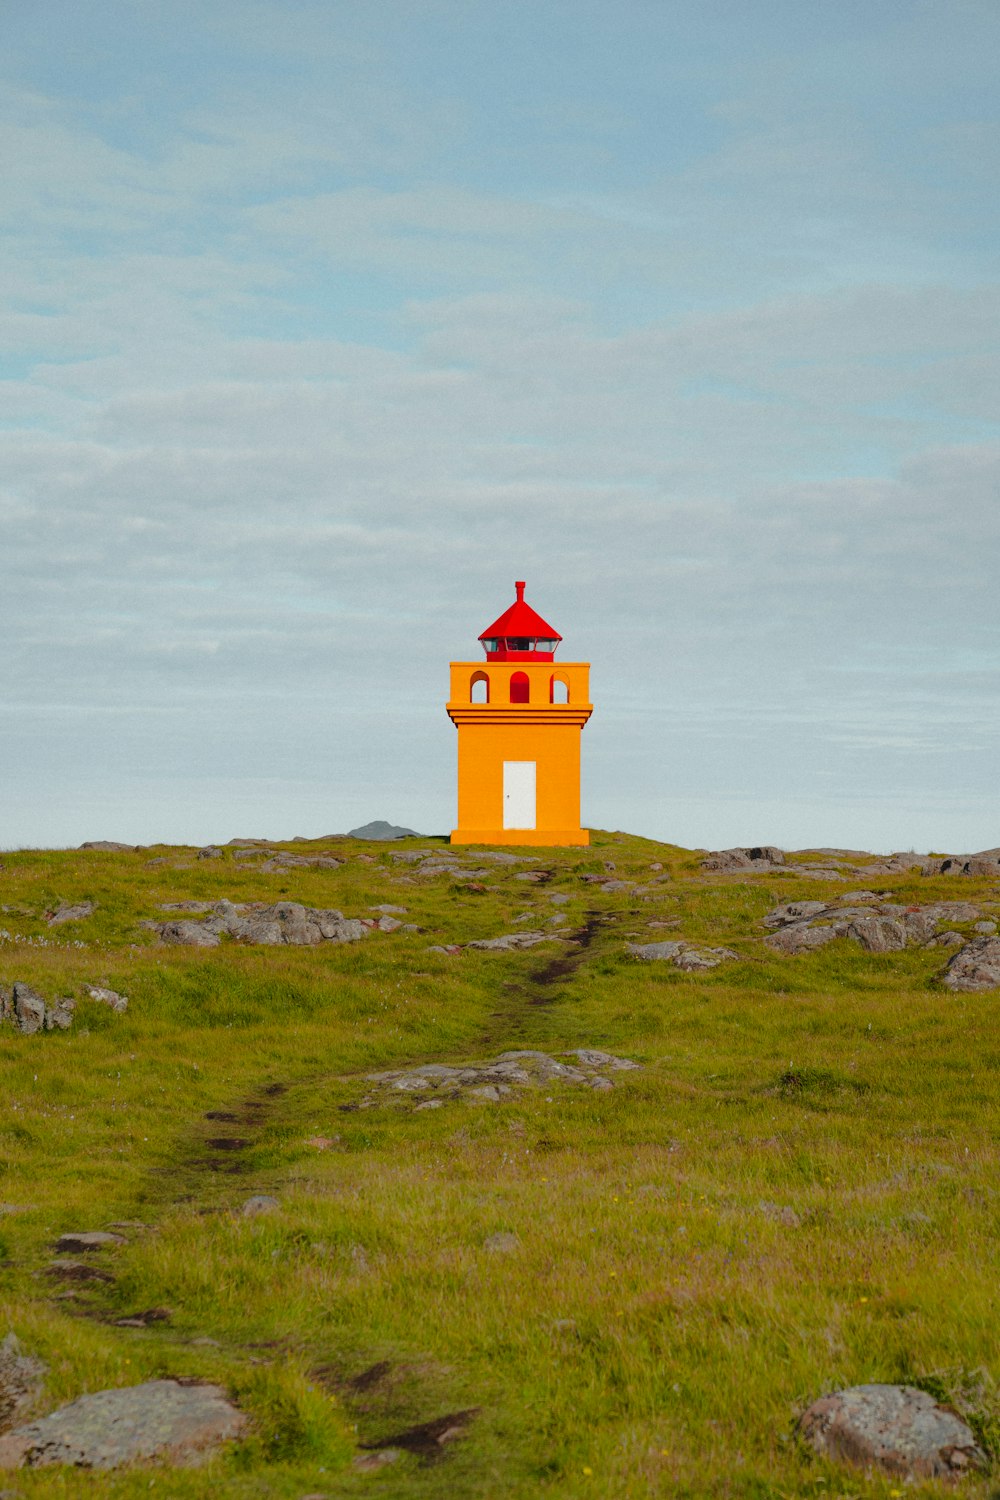 a yellow and red light house sitting on top of a hill